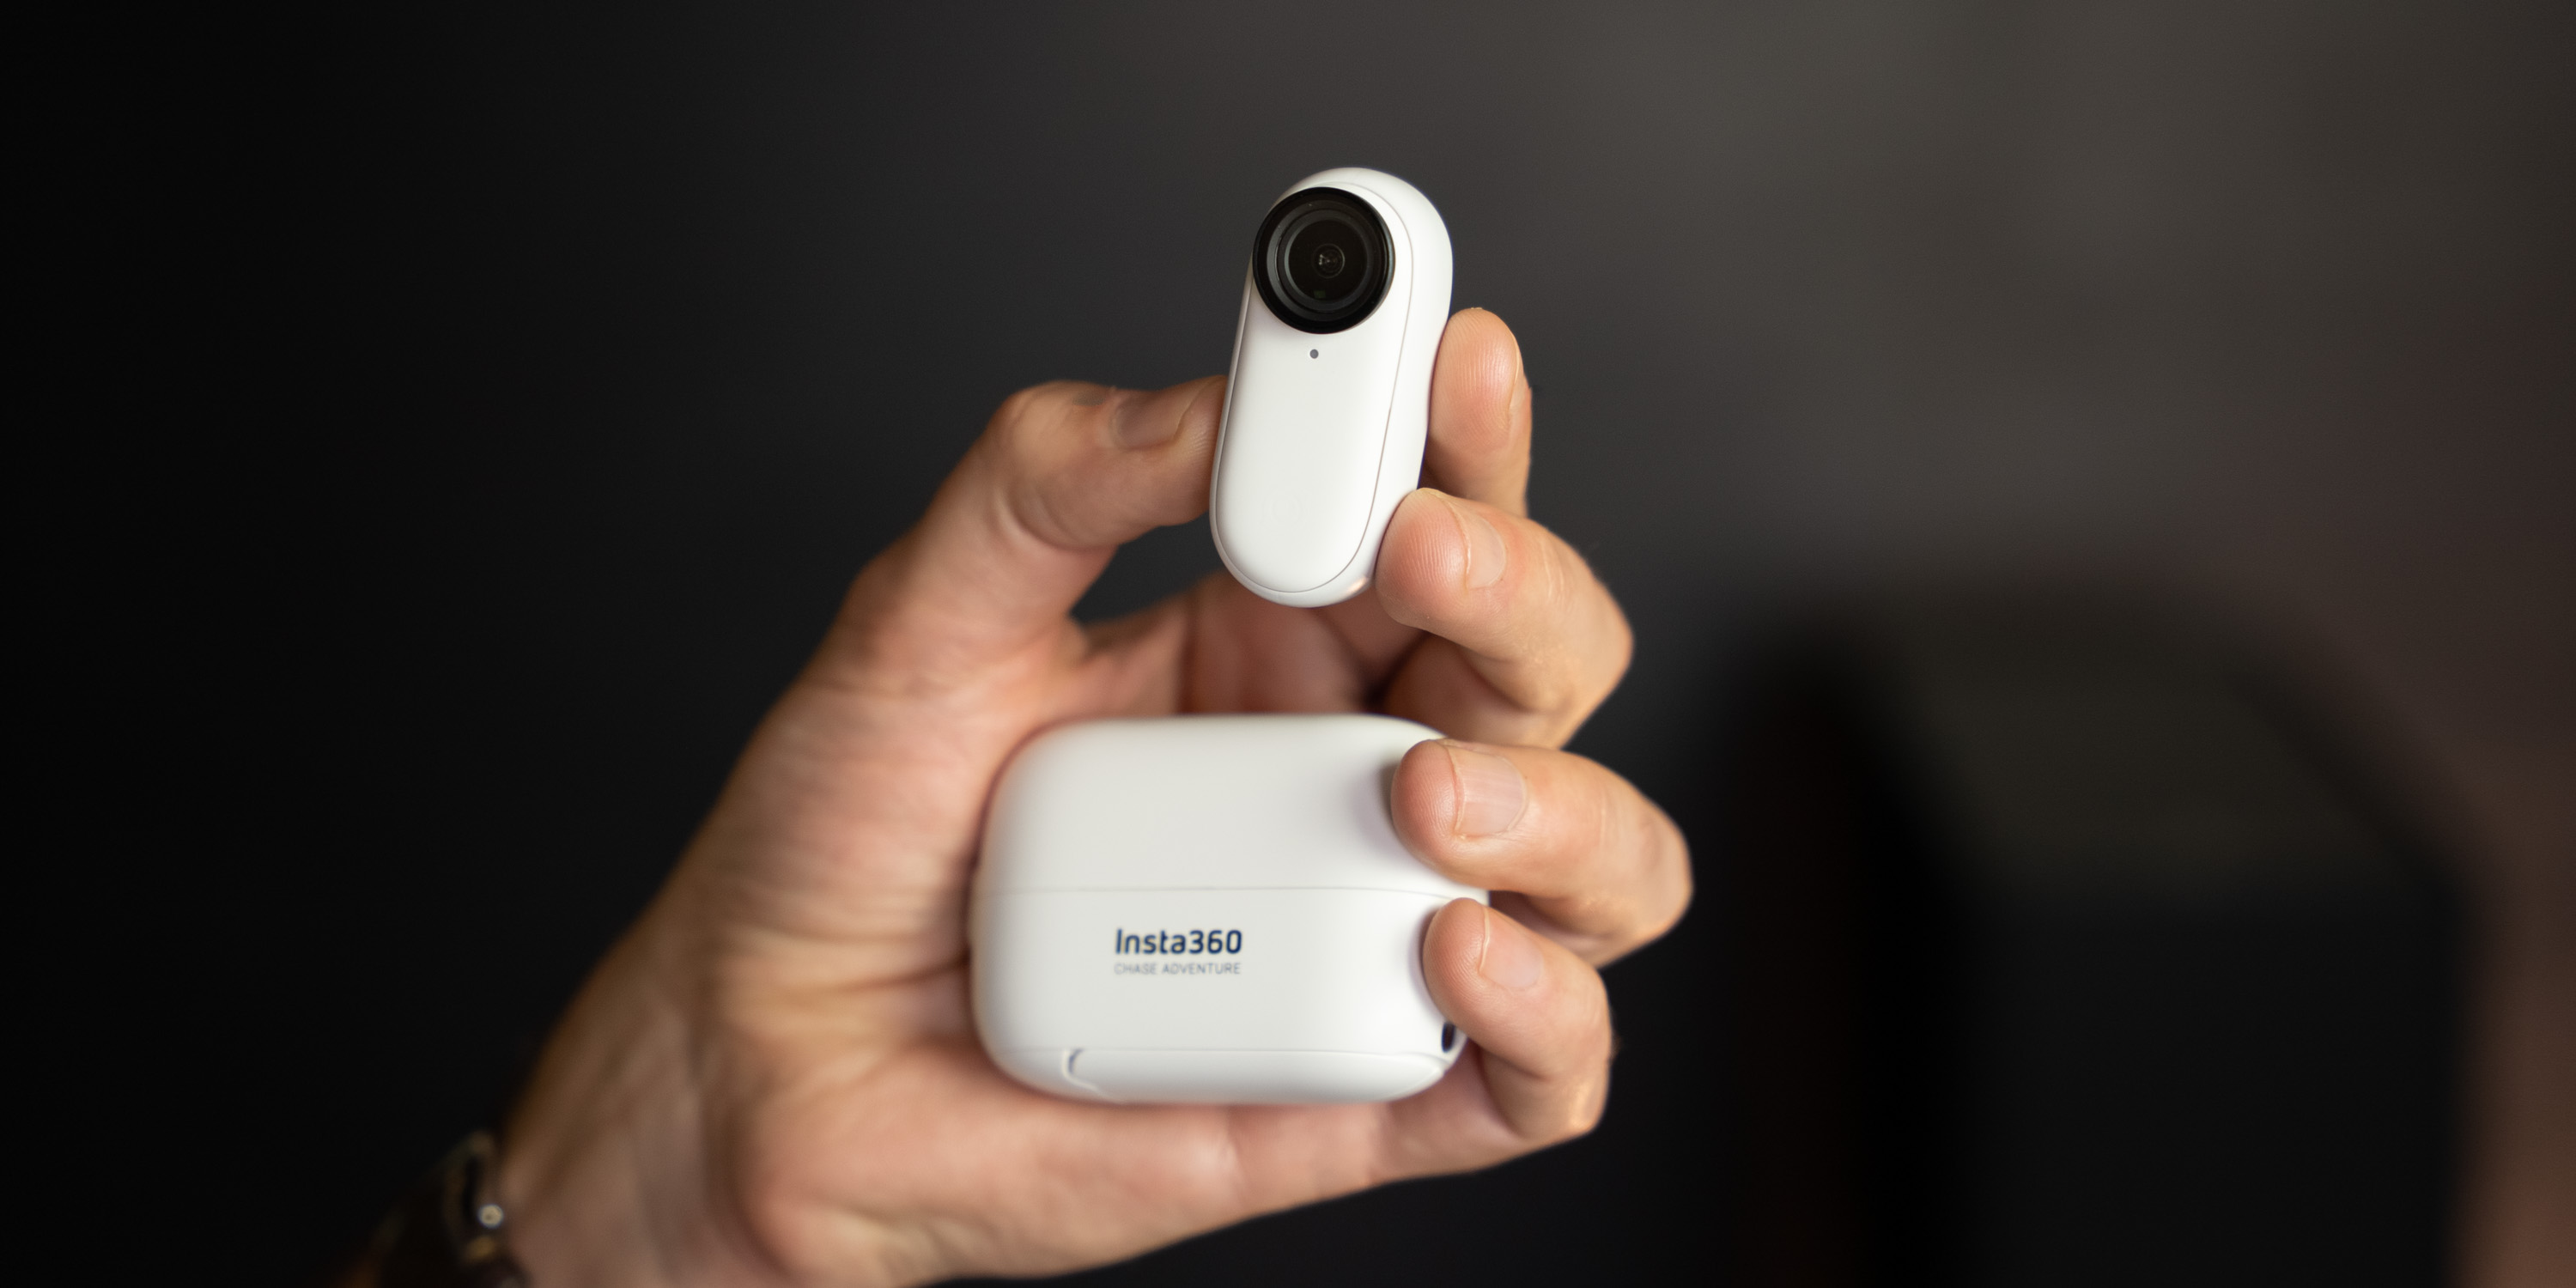 Review: Insta360 Go 2 is the simplest way to get great action footage